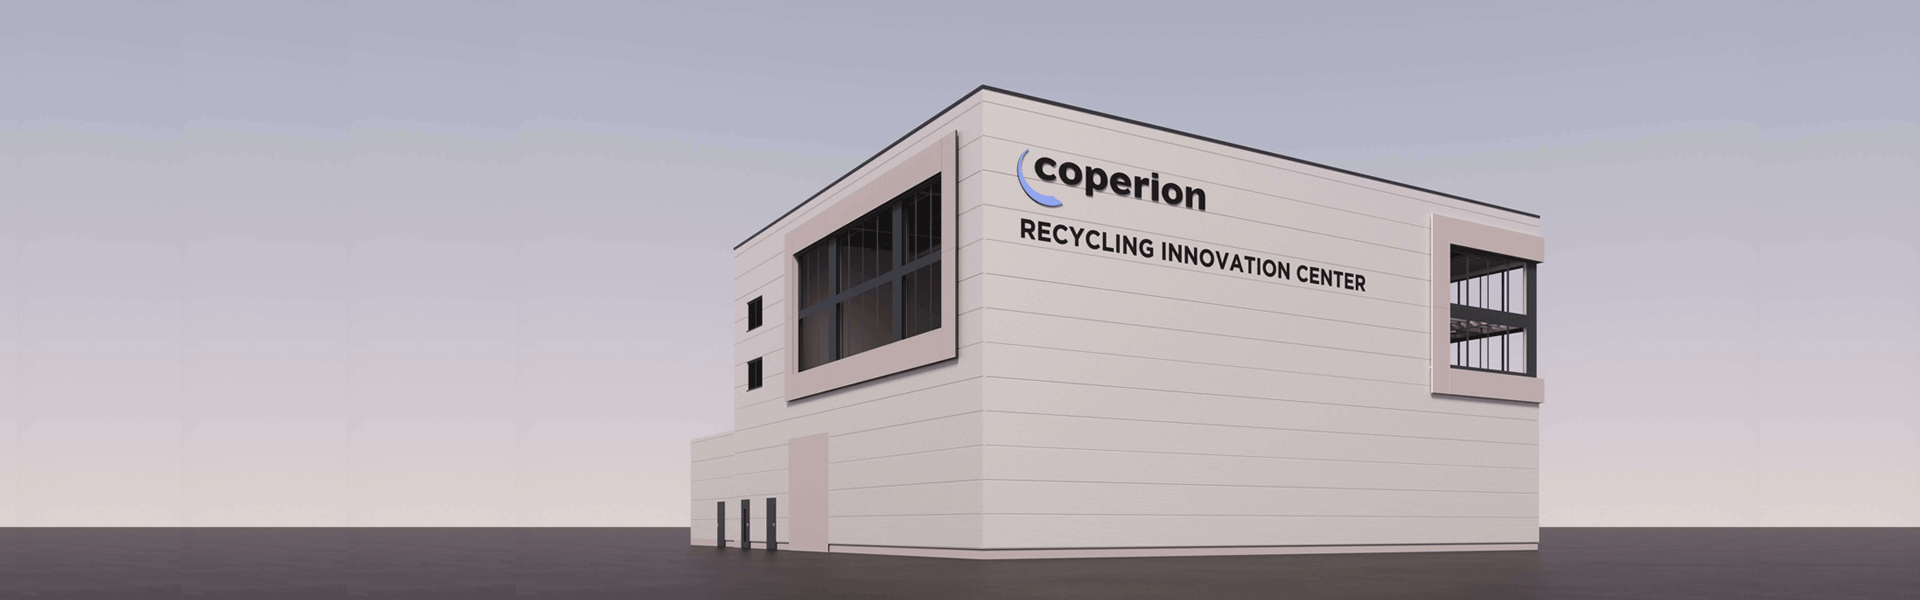 Coperion Recycling Innovation Center - New construction of state-of-the-art test lab for plastics recycling applications